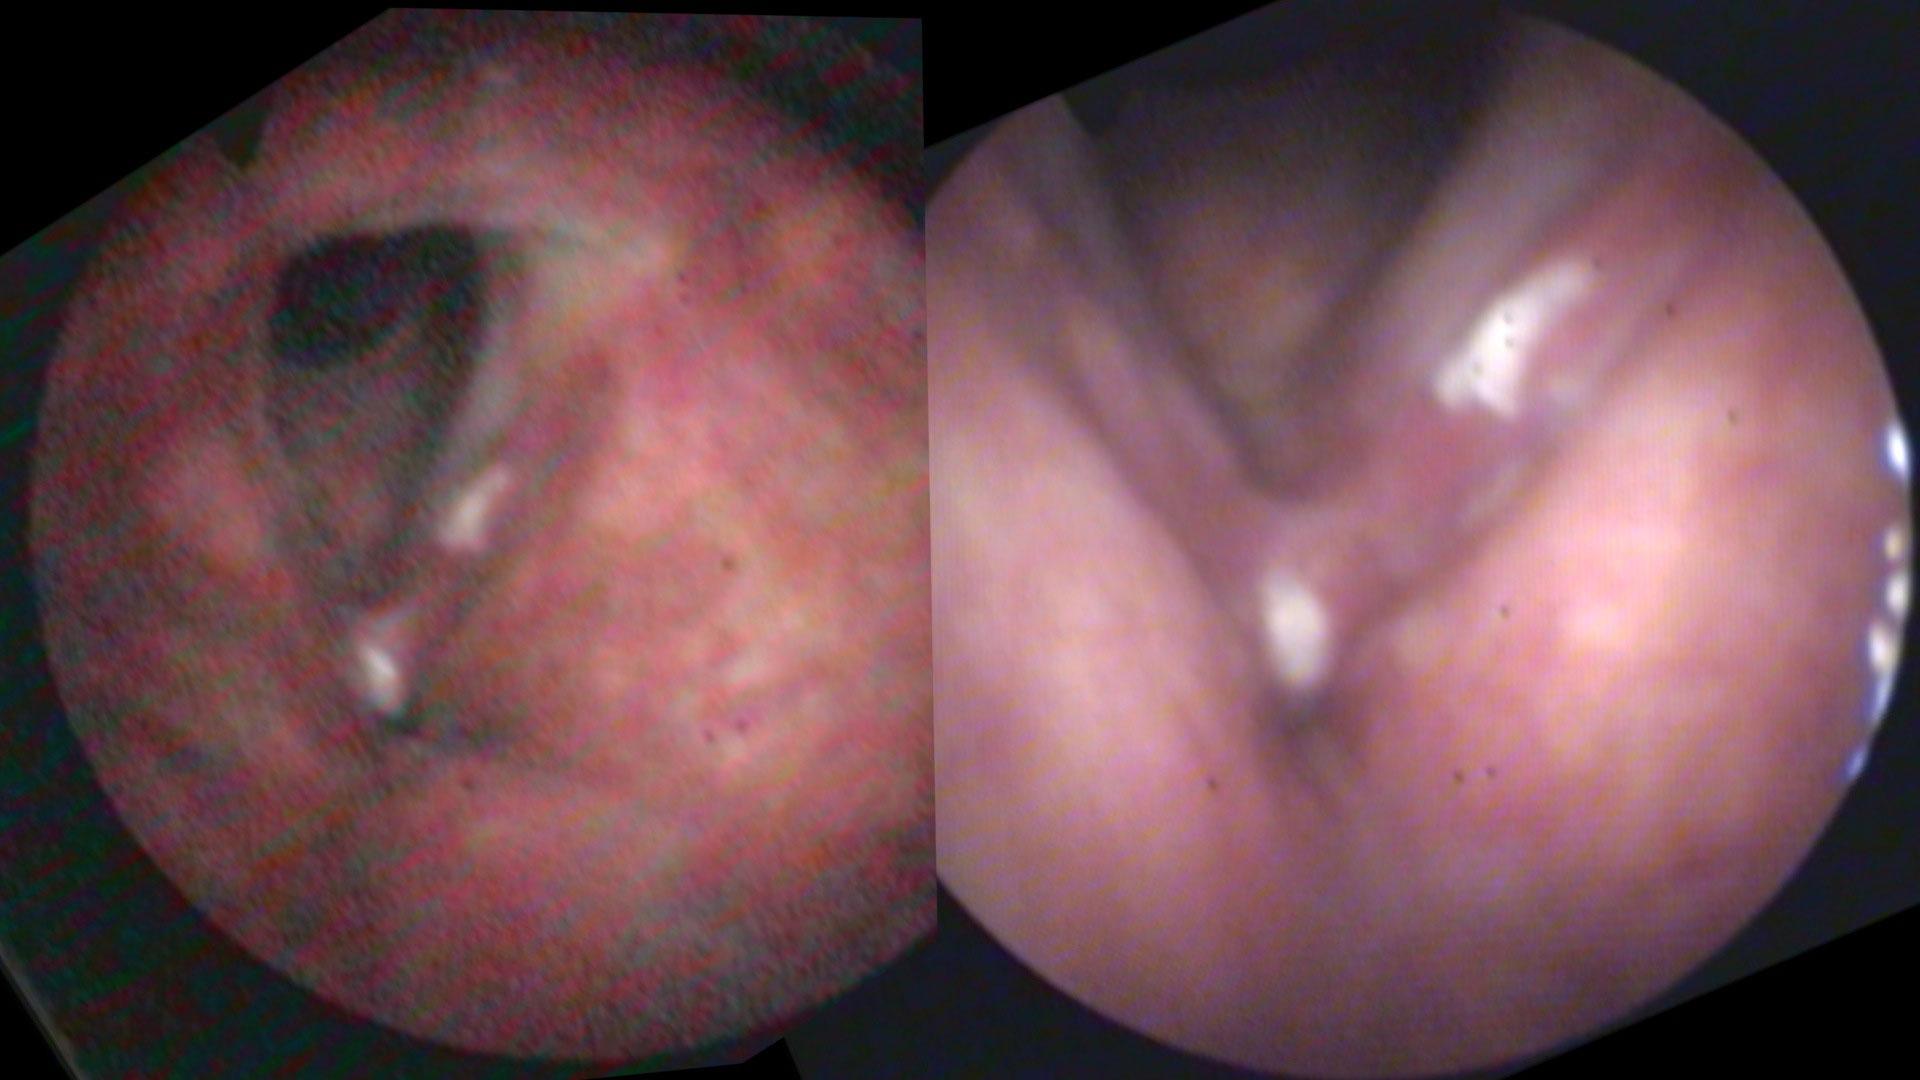 Same person, same day, same camera. The image on the right is taken with the endoscope closer to the larynx so that more light is on the larynx and the auto gain feature is reduced.